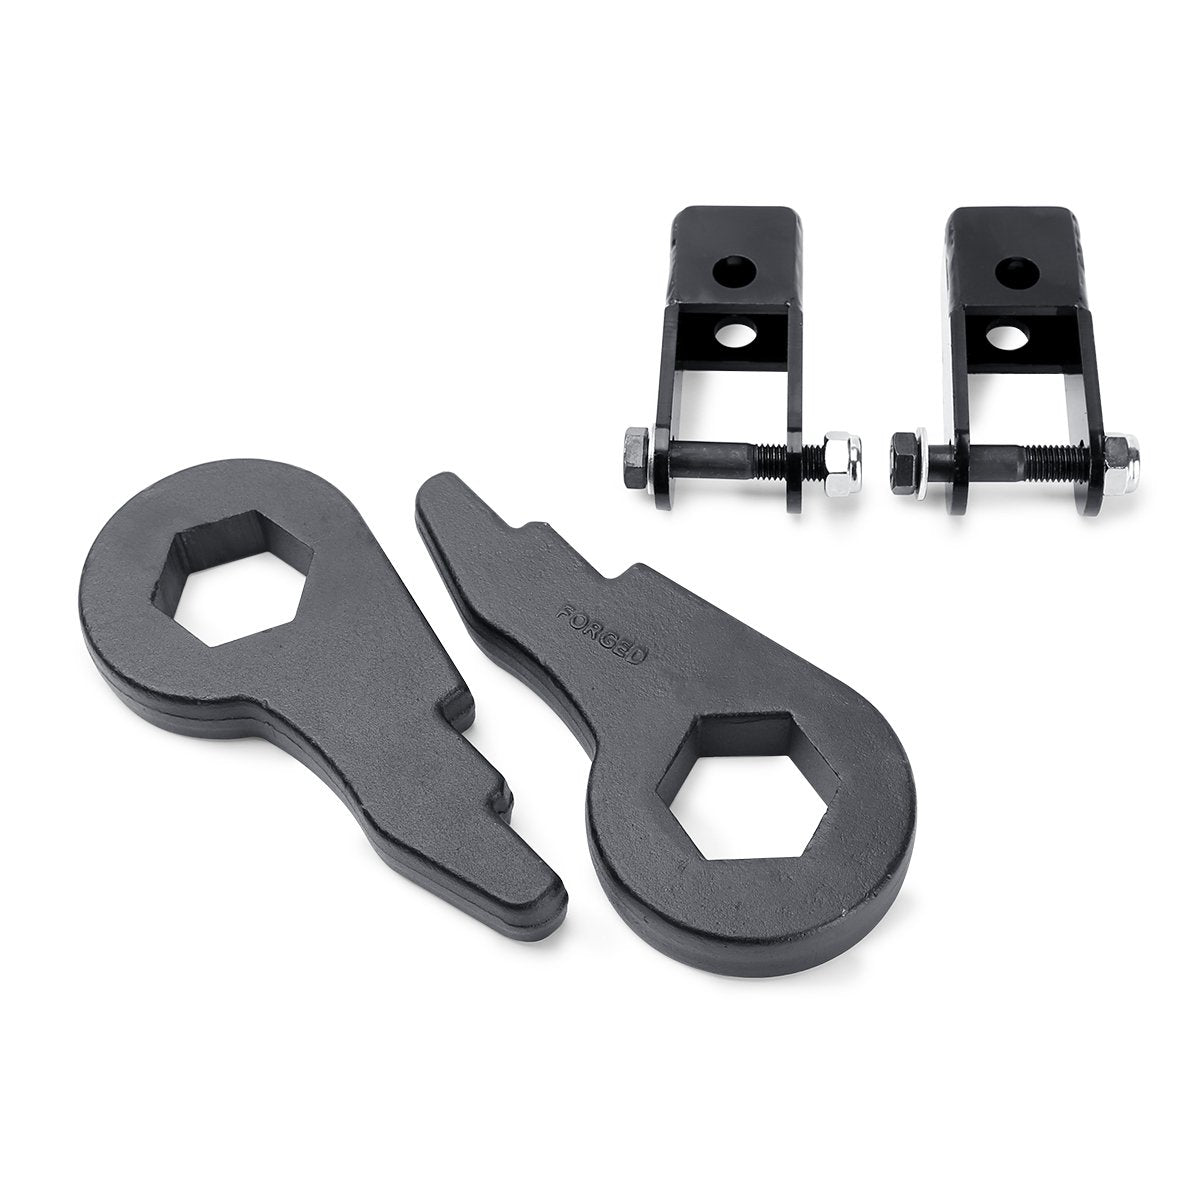 1"-3" Front Leveling Lift Kit 4WD with shock extenders For 1999-2007 Silverado Sierra SUV xccscss.